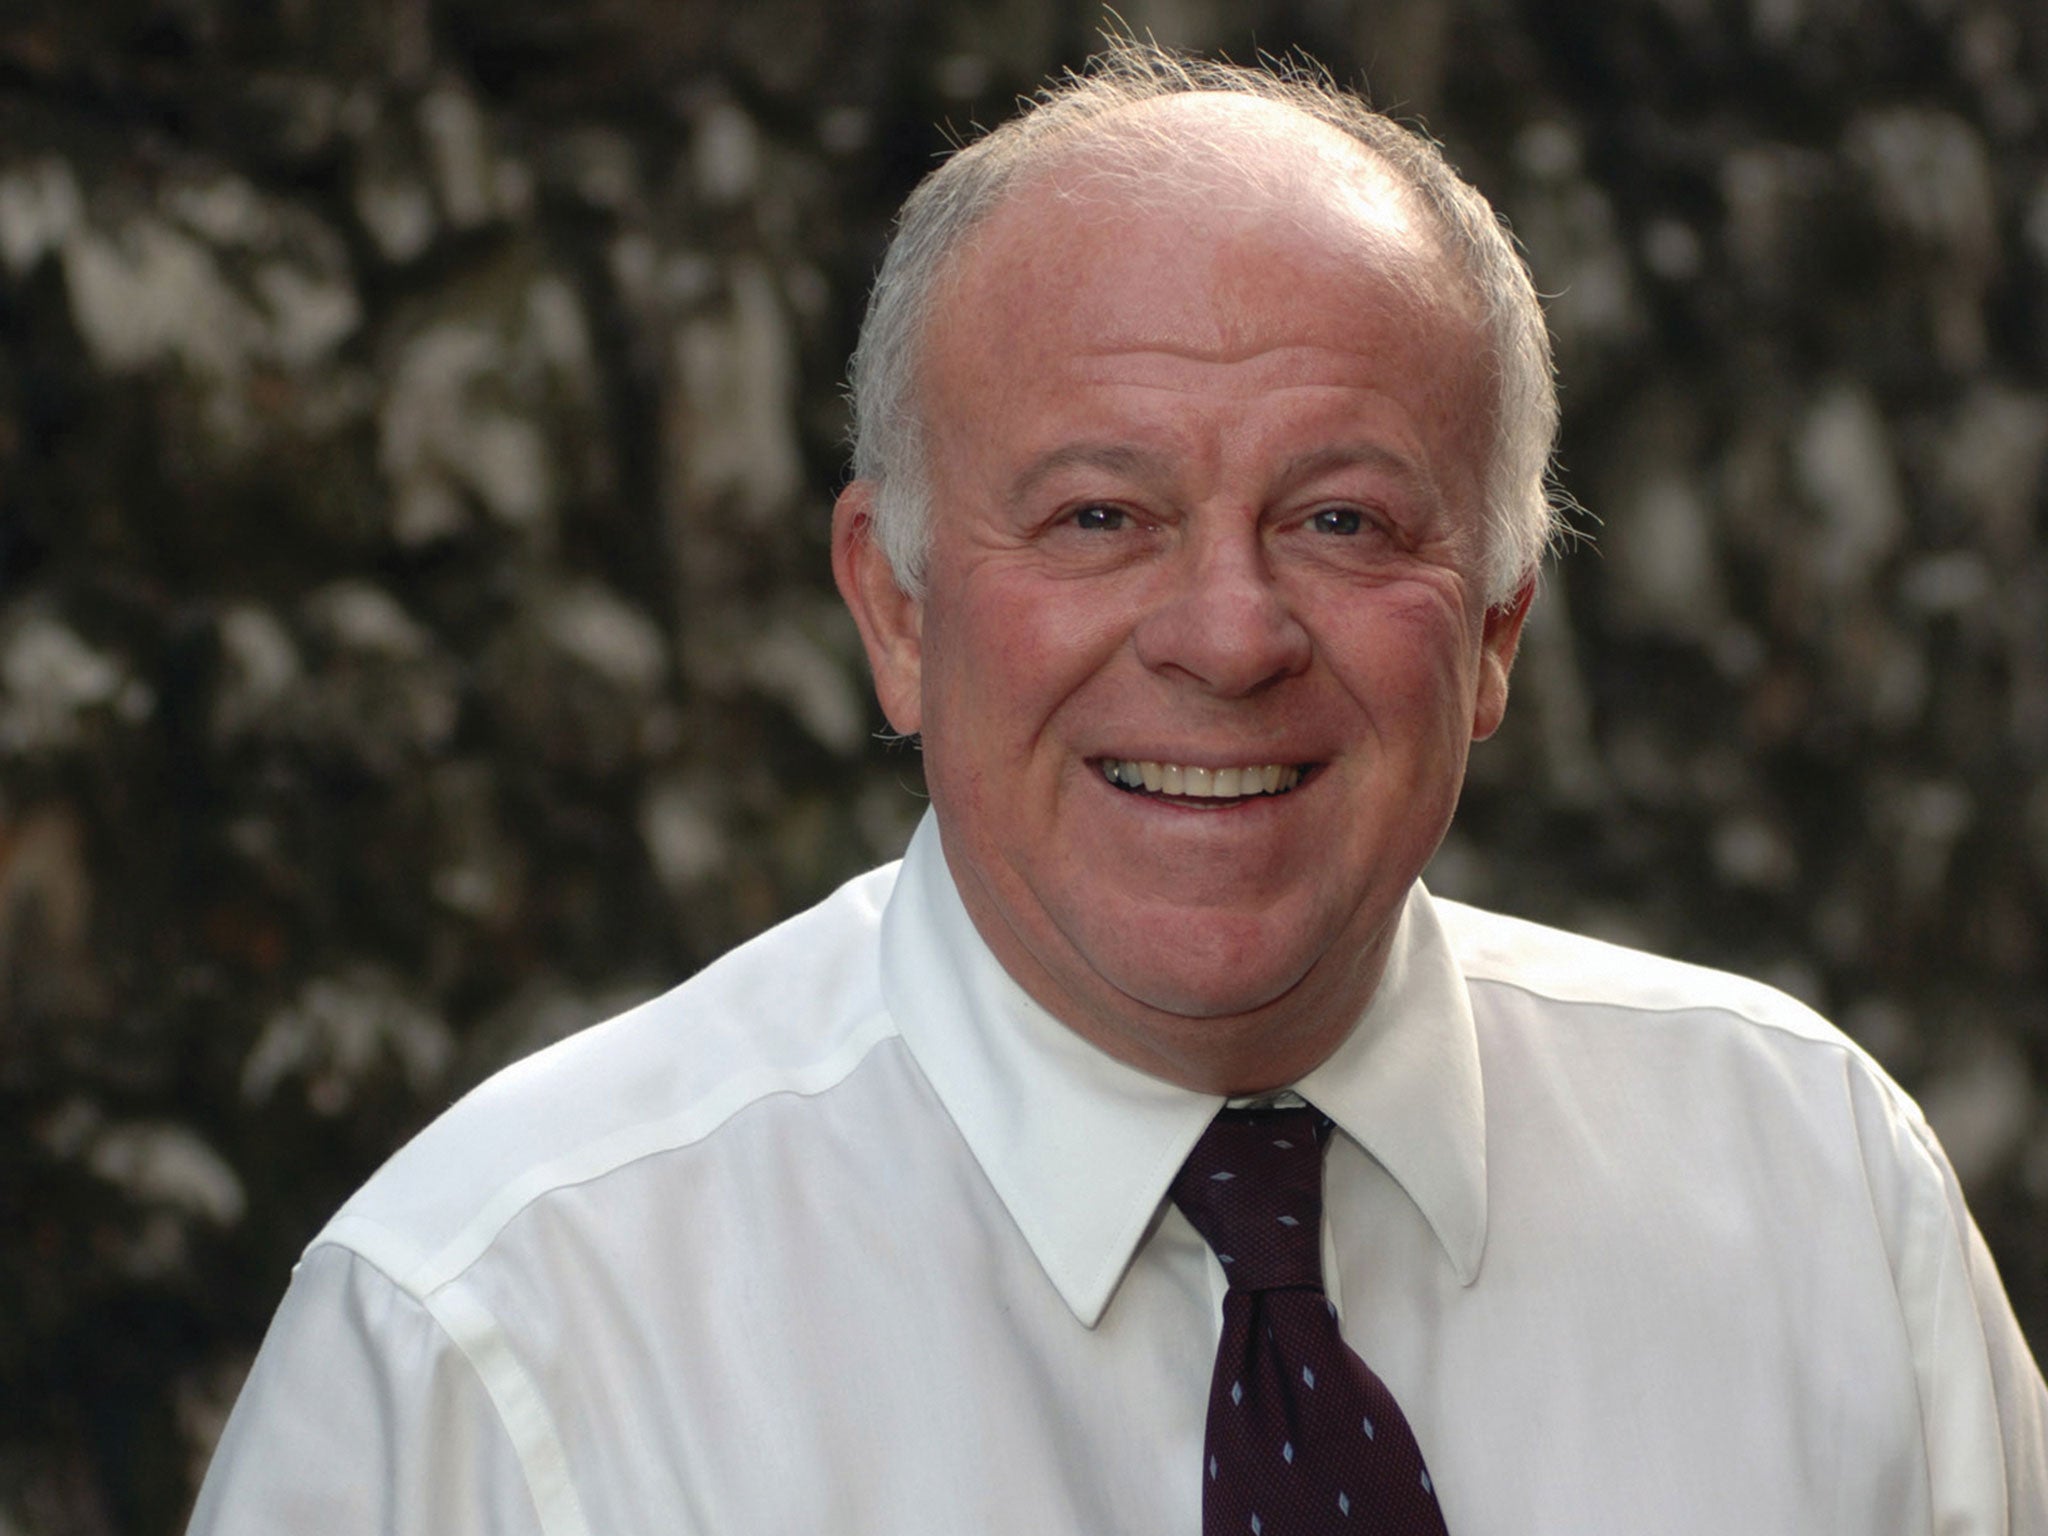 Peter Hargreaves gave £3.2m to the Leave campaign in the run up to the referendum